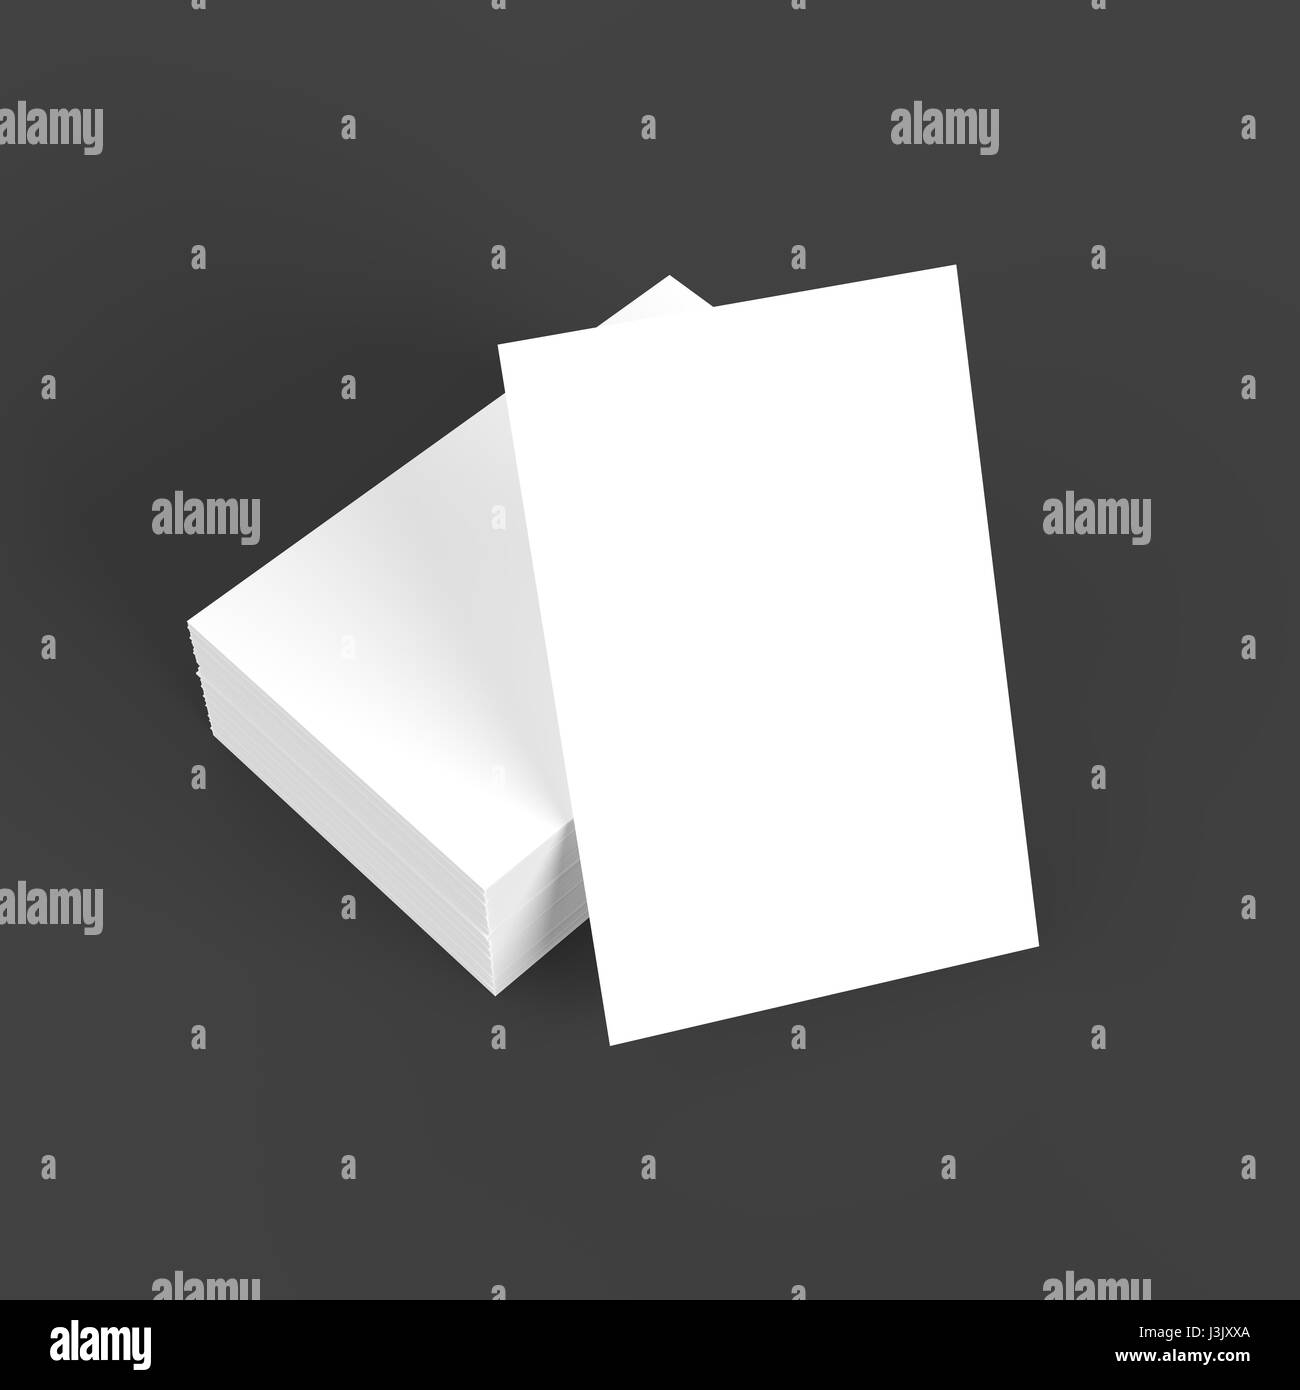 Business card mock up on dark background with soft shadows and highlights. 3D illustrated Stock Photo